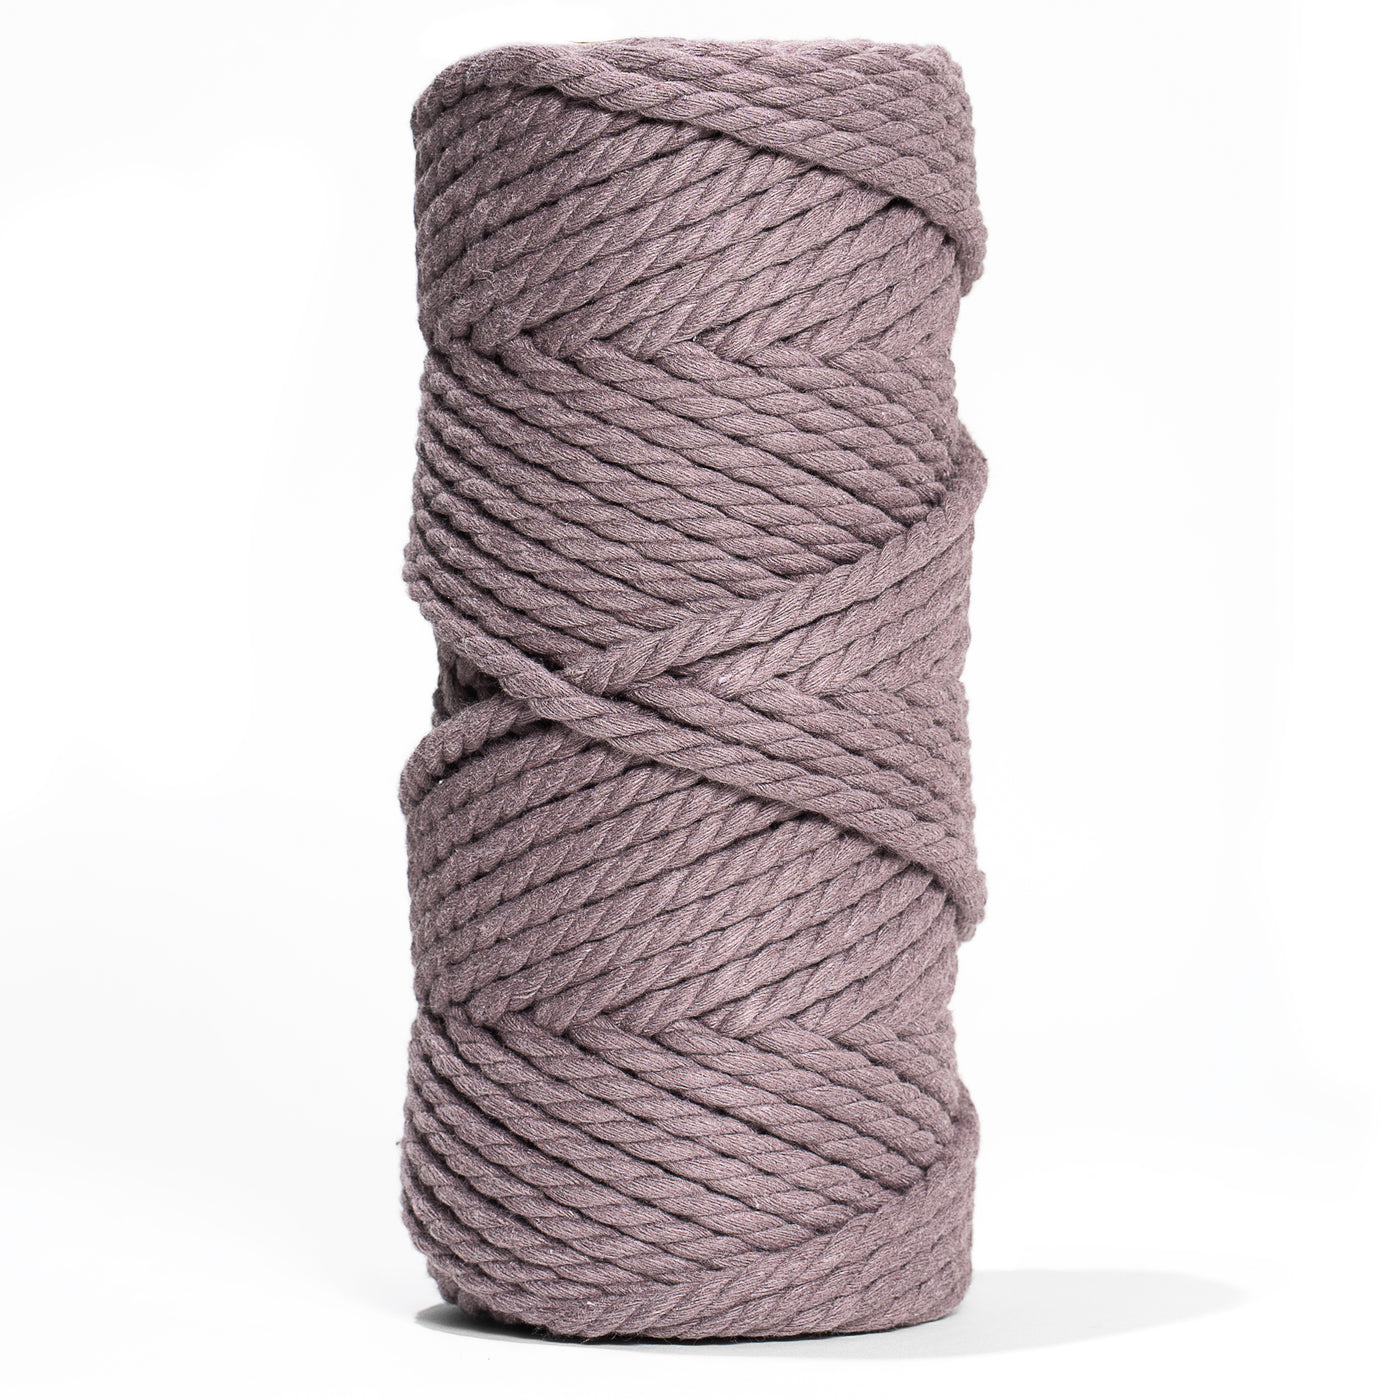 COTTON ROPE ZERO WASTE 5 MM - 3 PLY - DUSTY LAVENDER COLOR